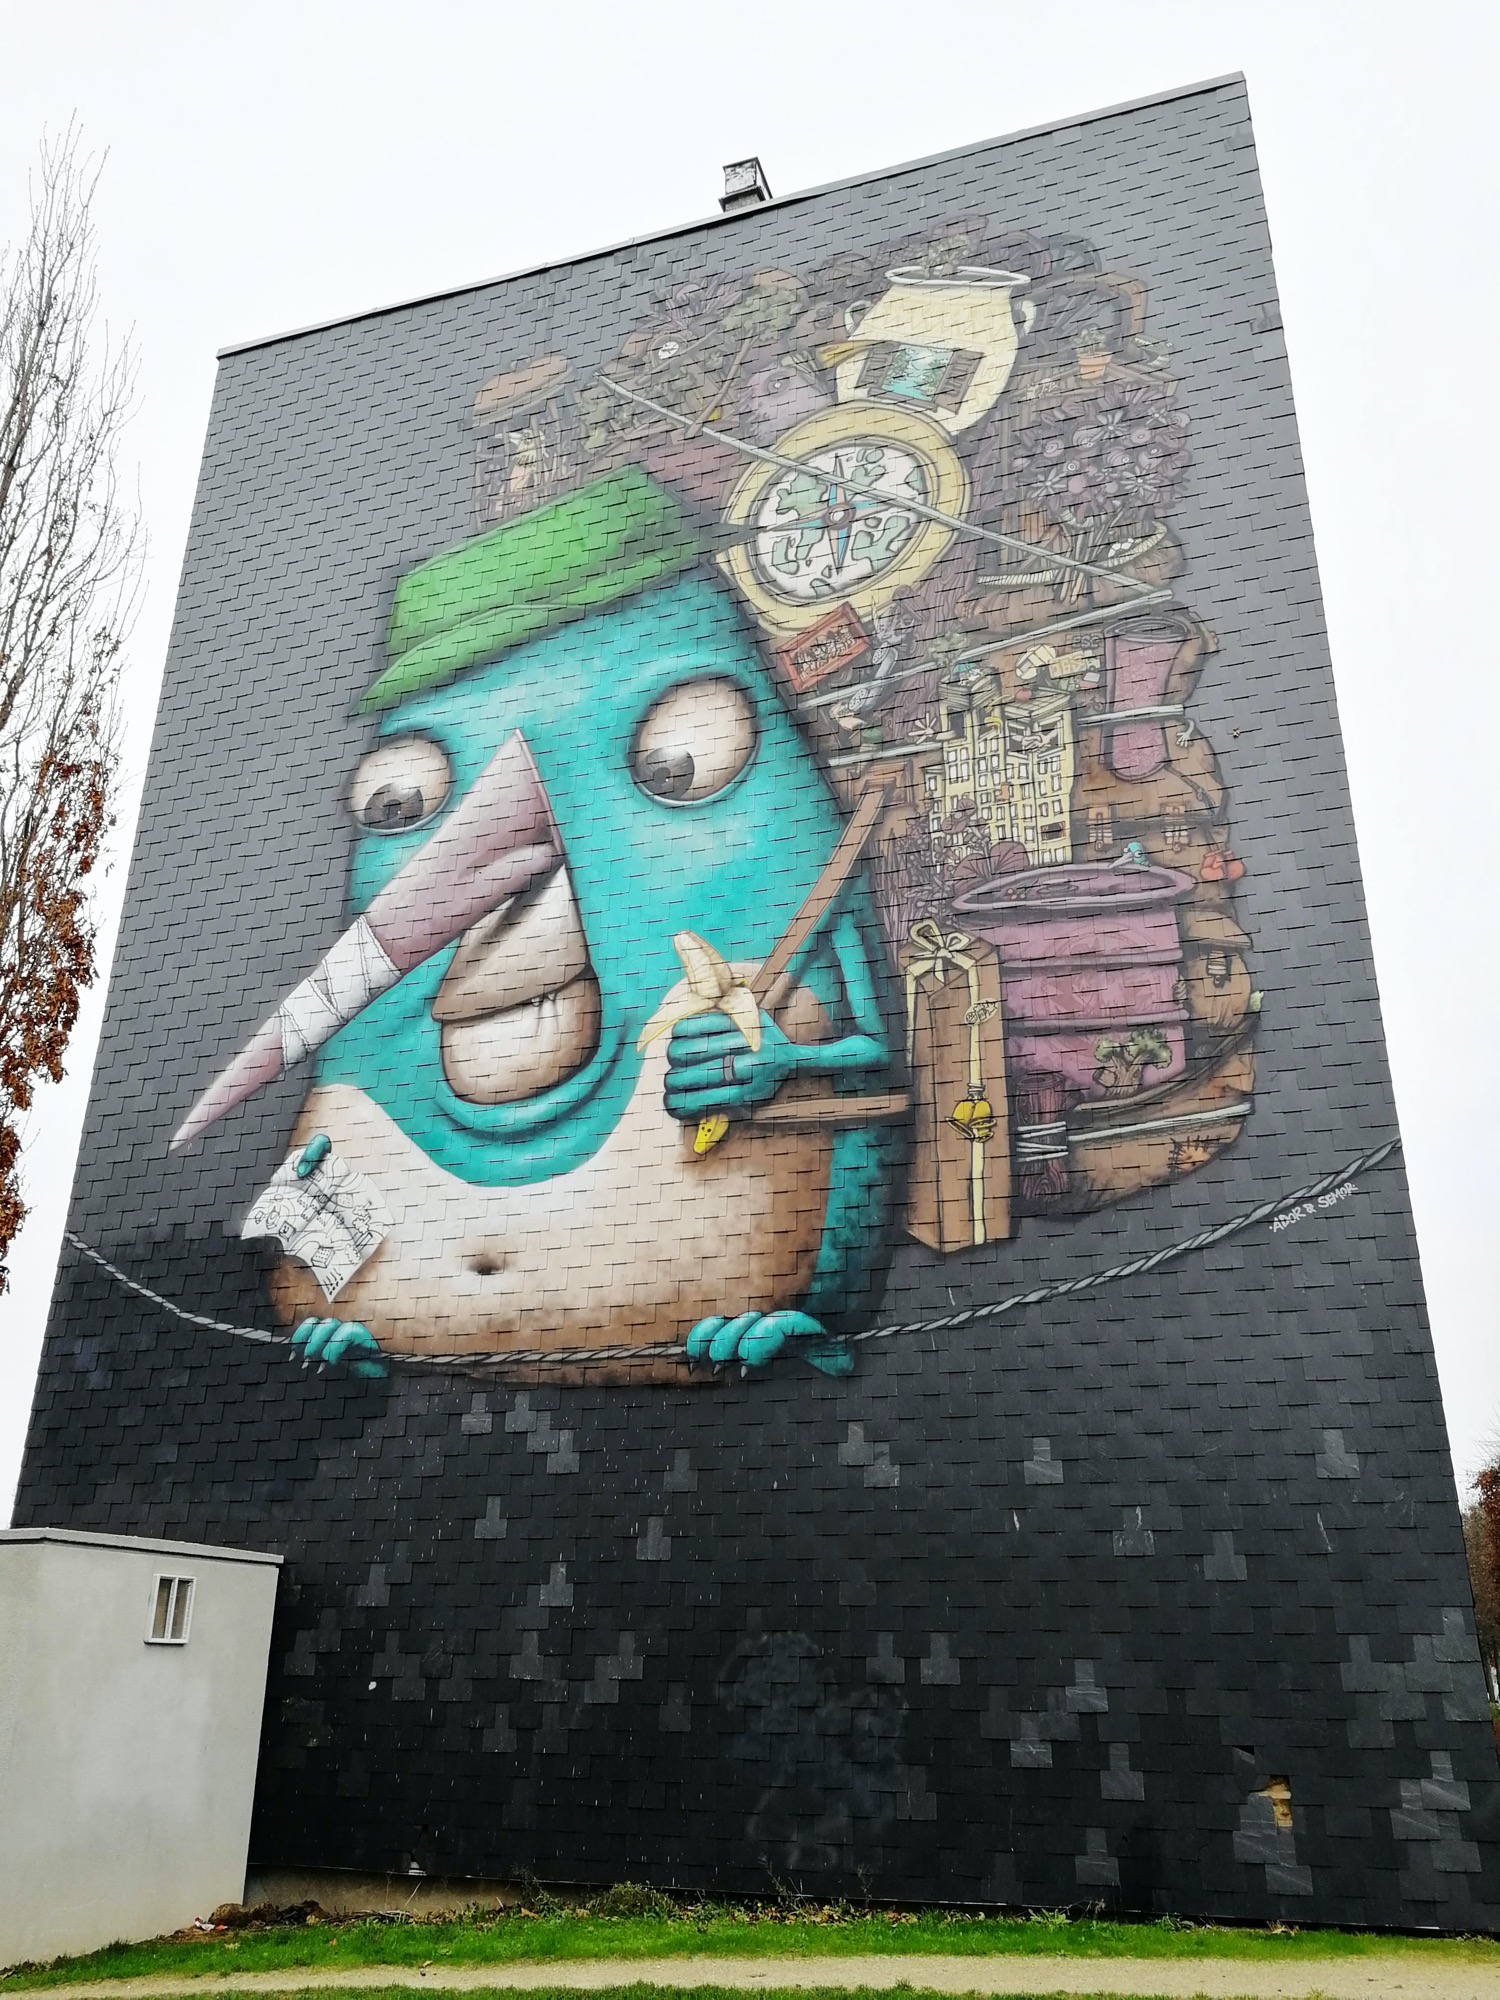 Graffiti 582 Le voyageur by the artist Semor captured by Rabot in Rezé France